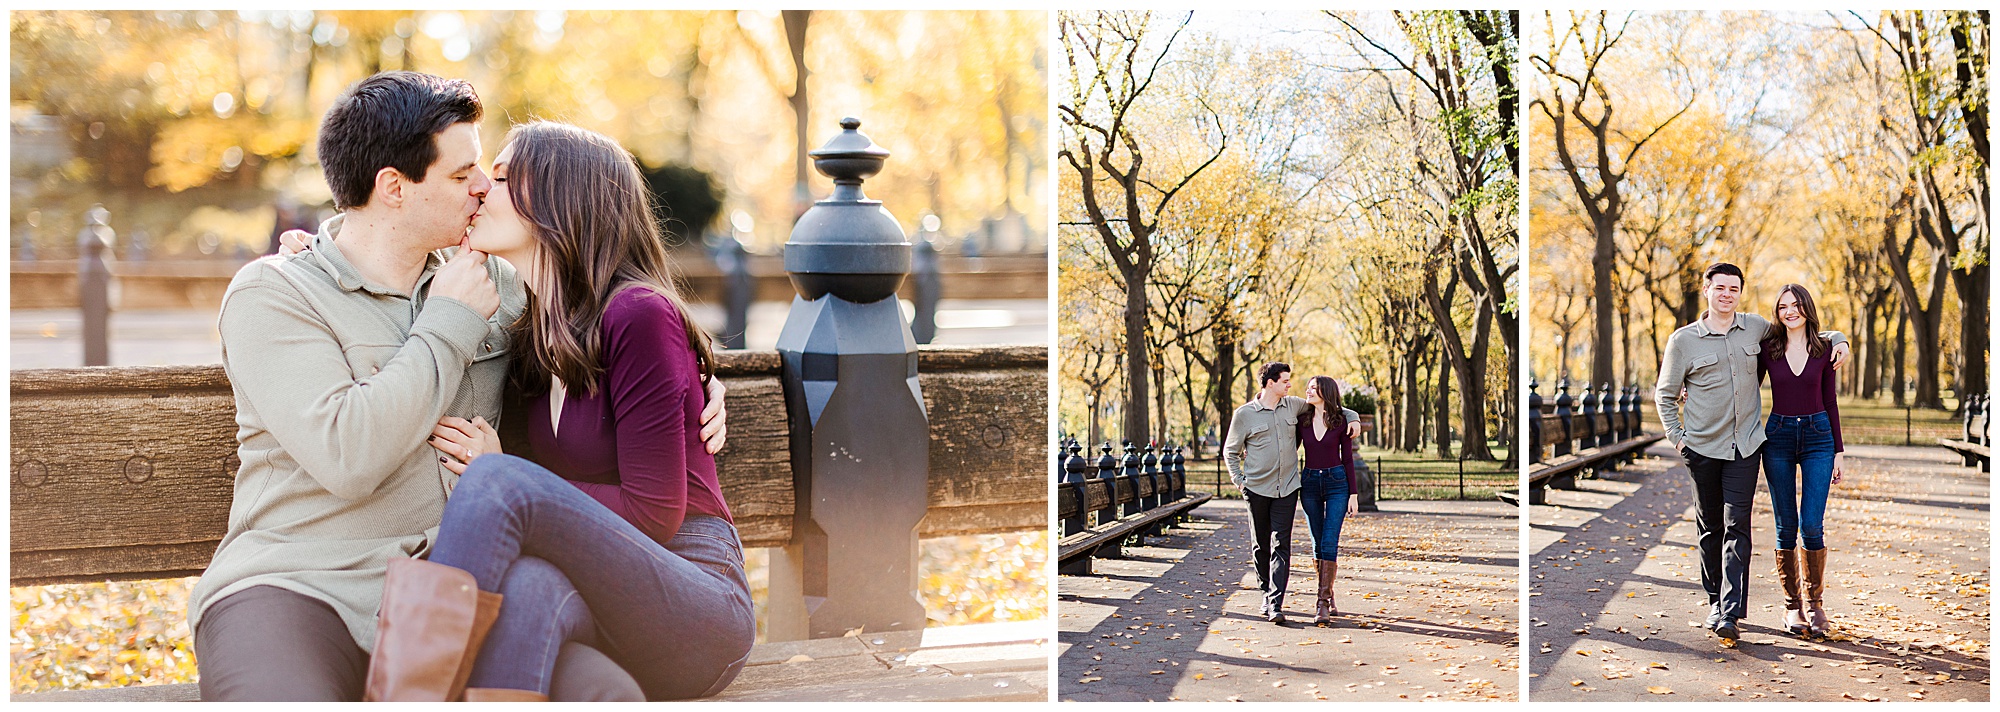 Intimate Engagement Photoshoot in Central Park